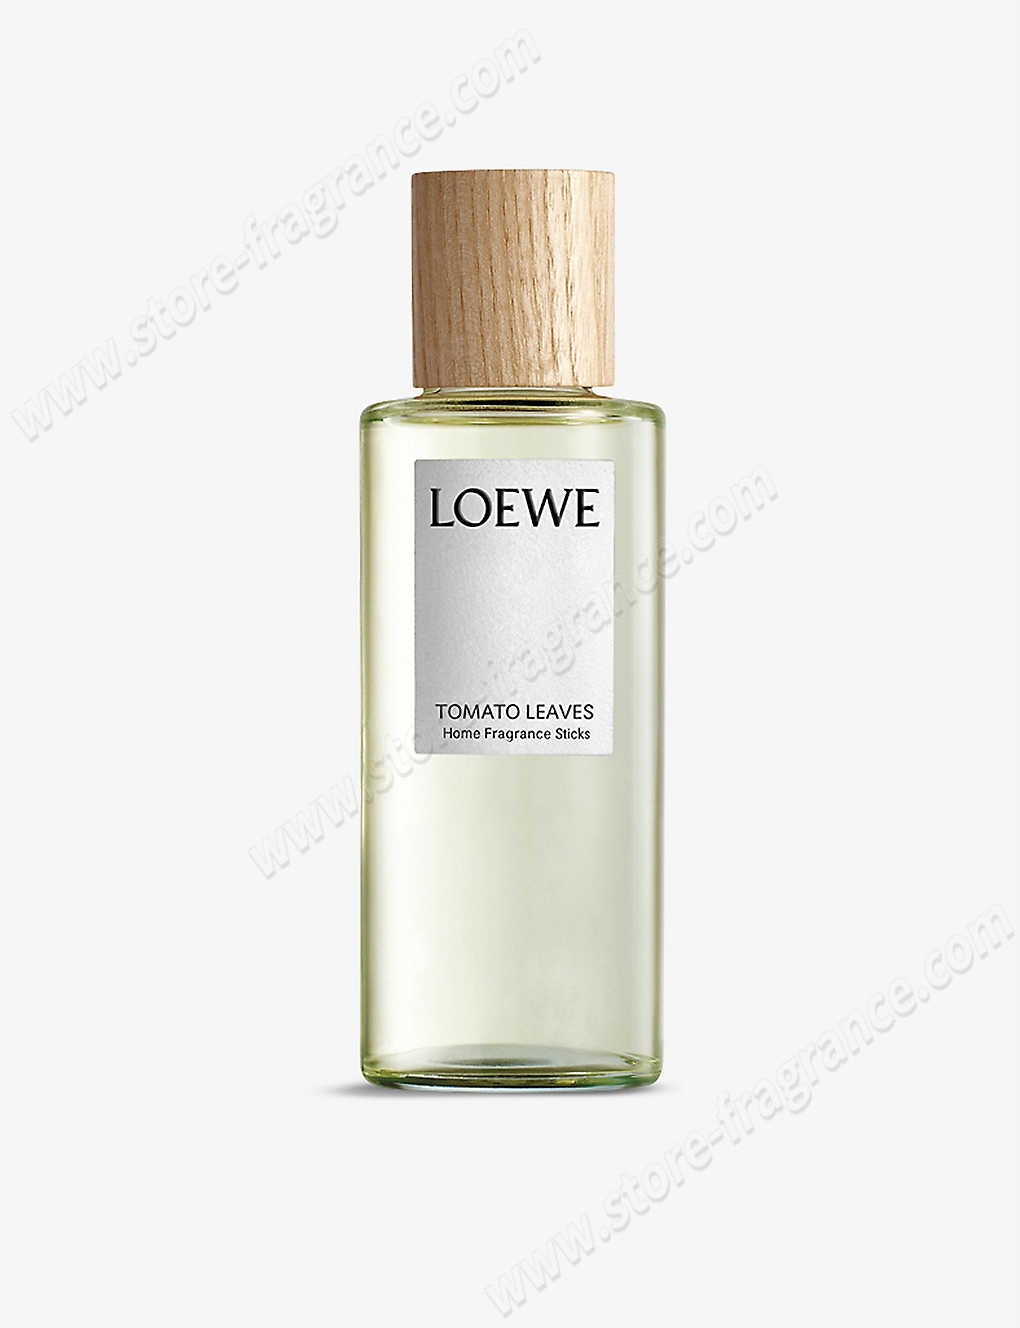 LOEWE/Tomato Leaves room diffuser 245ml ✿ Discount Store - -1